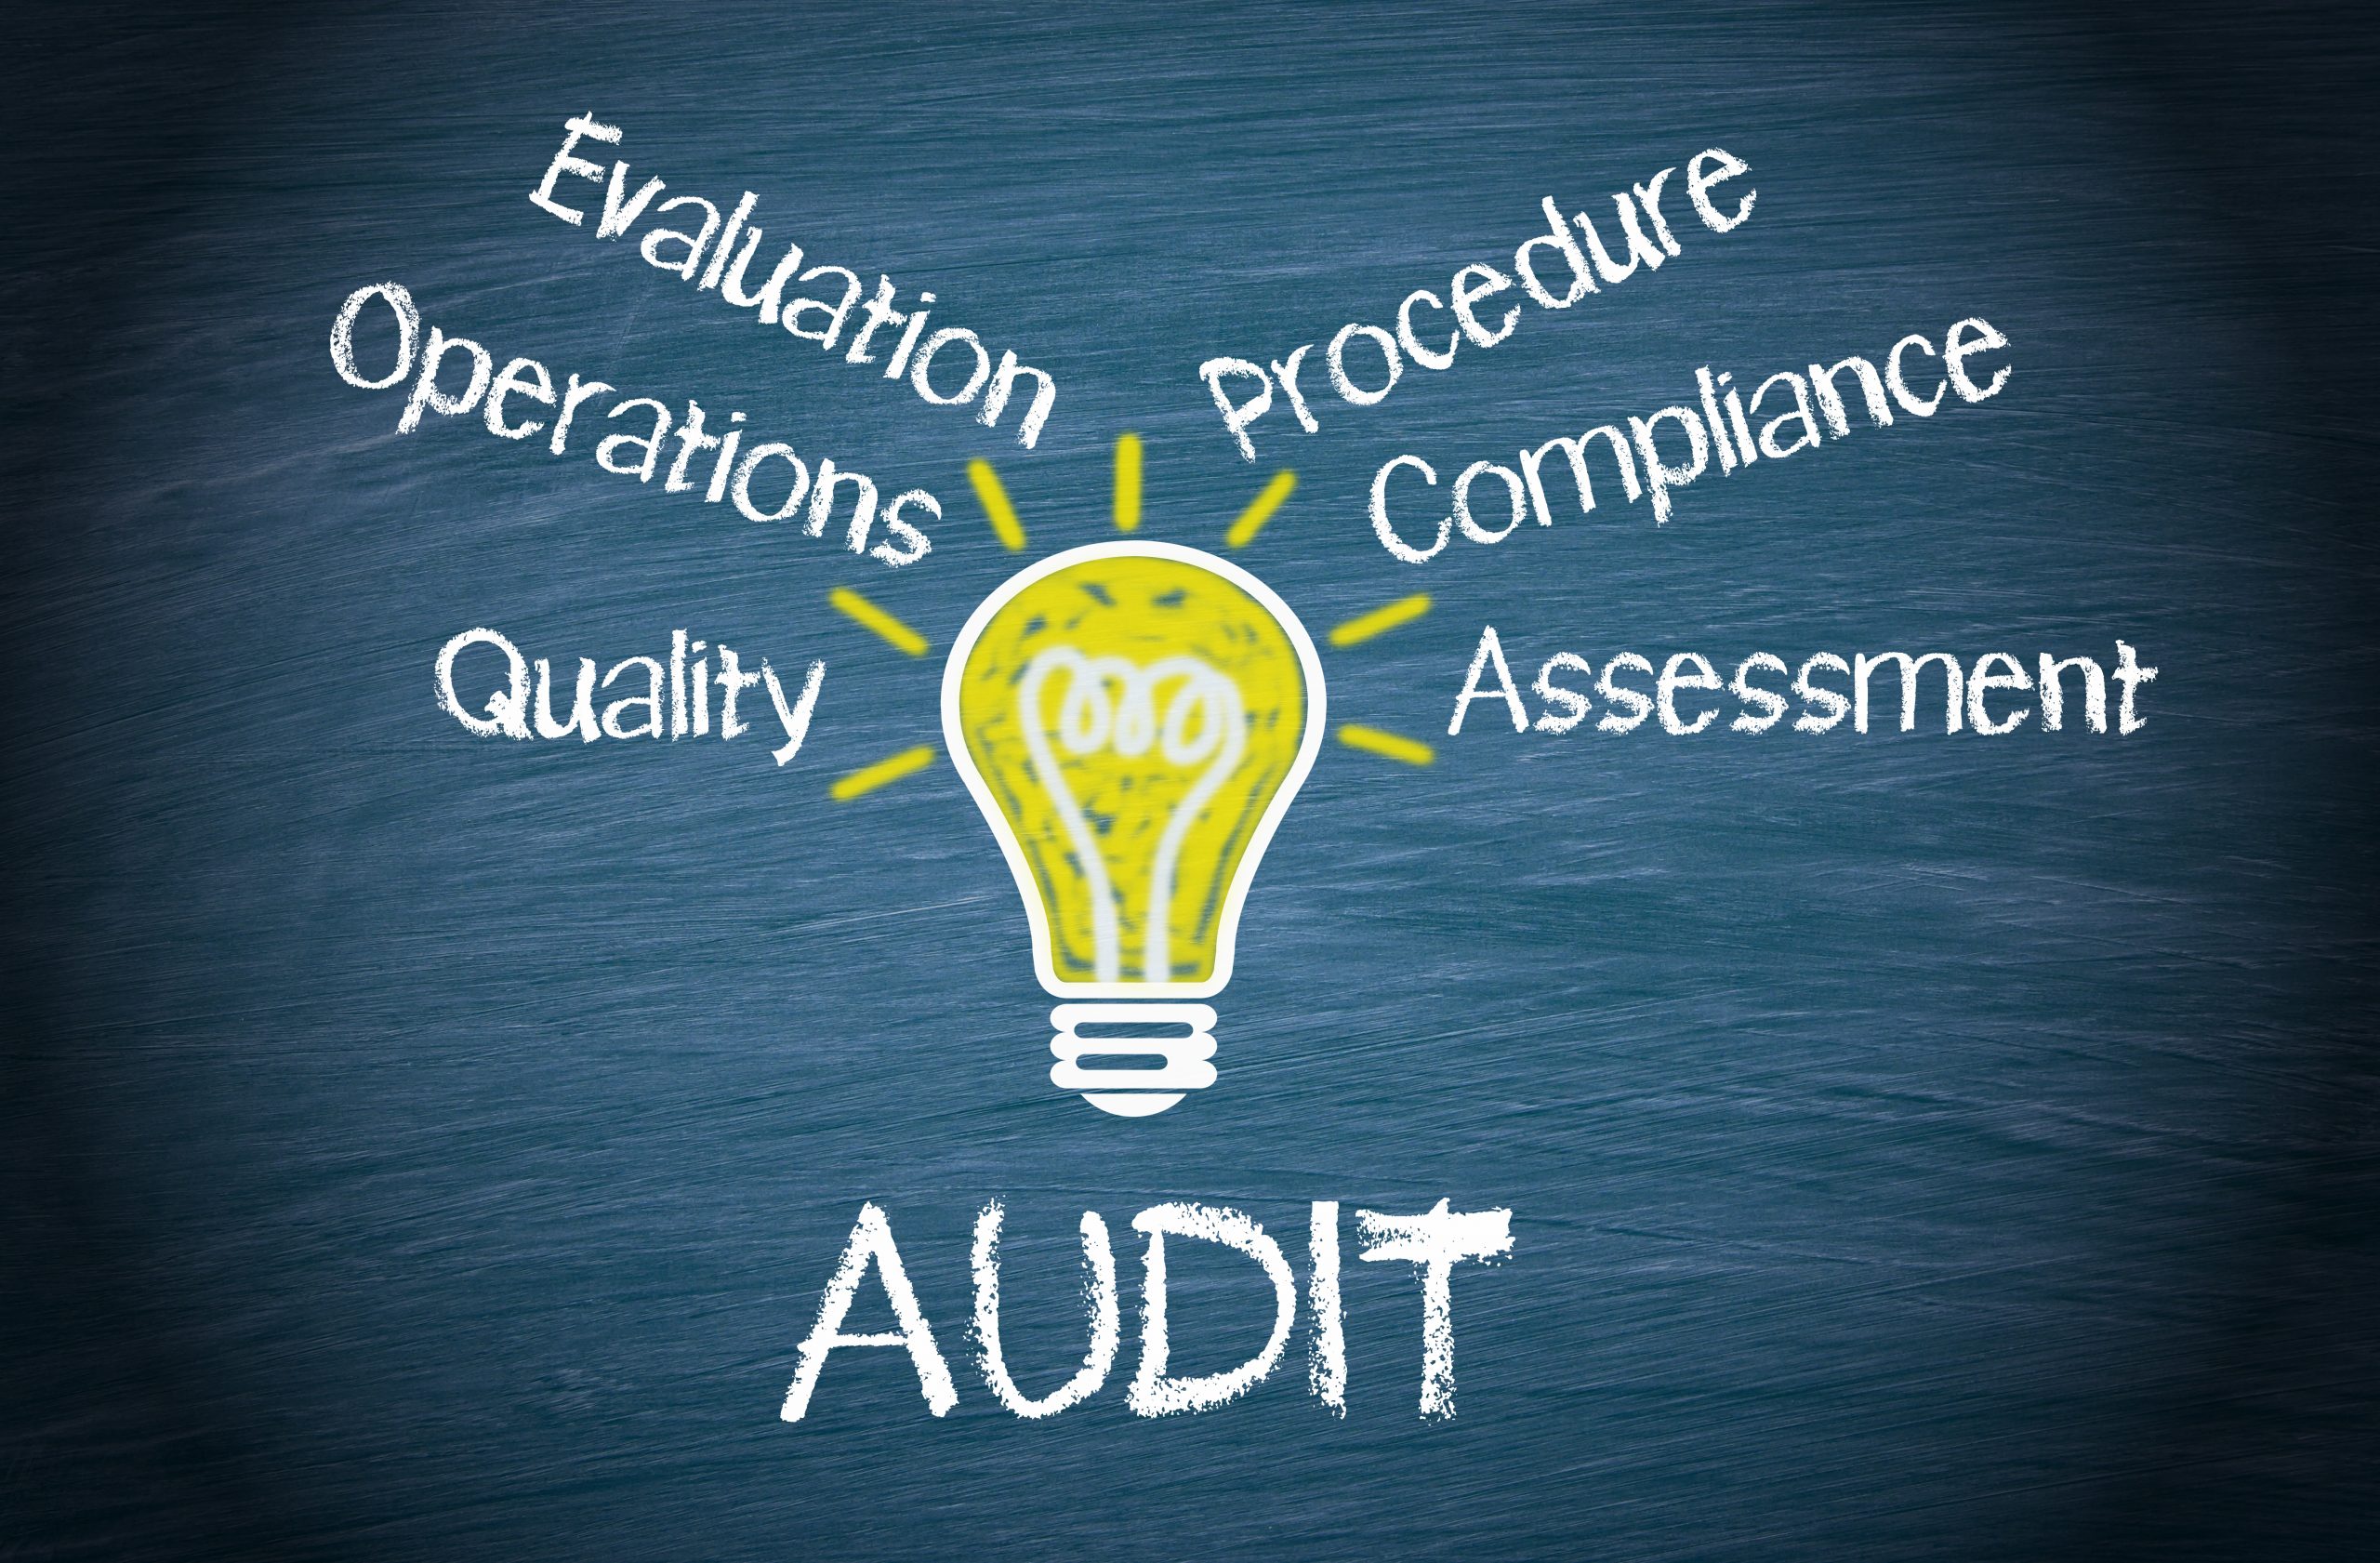 3. Audits and Inspections